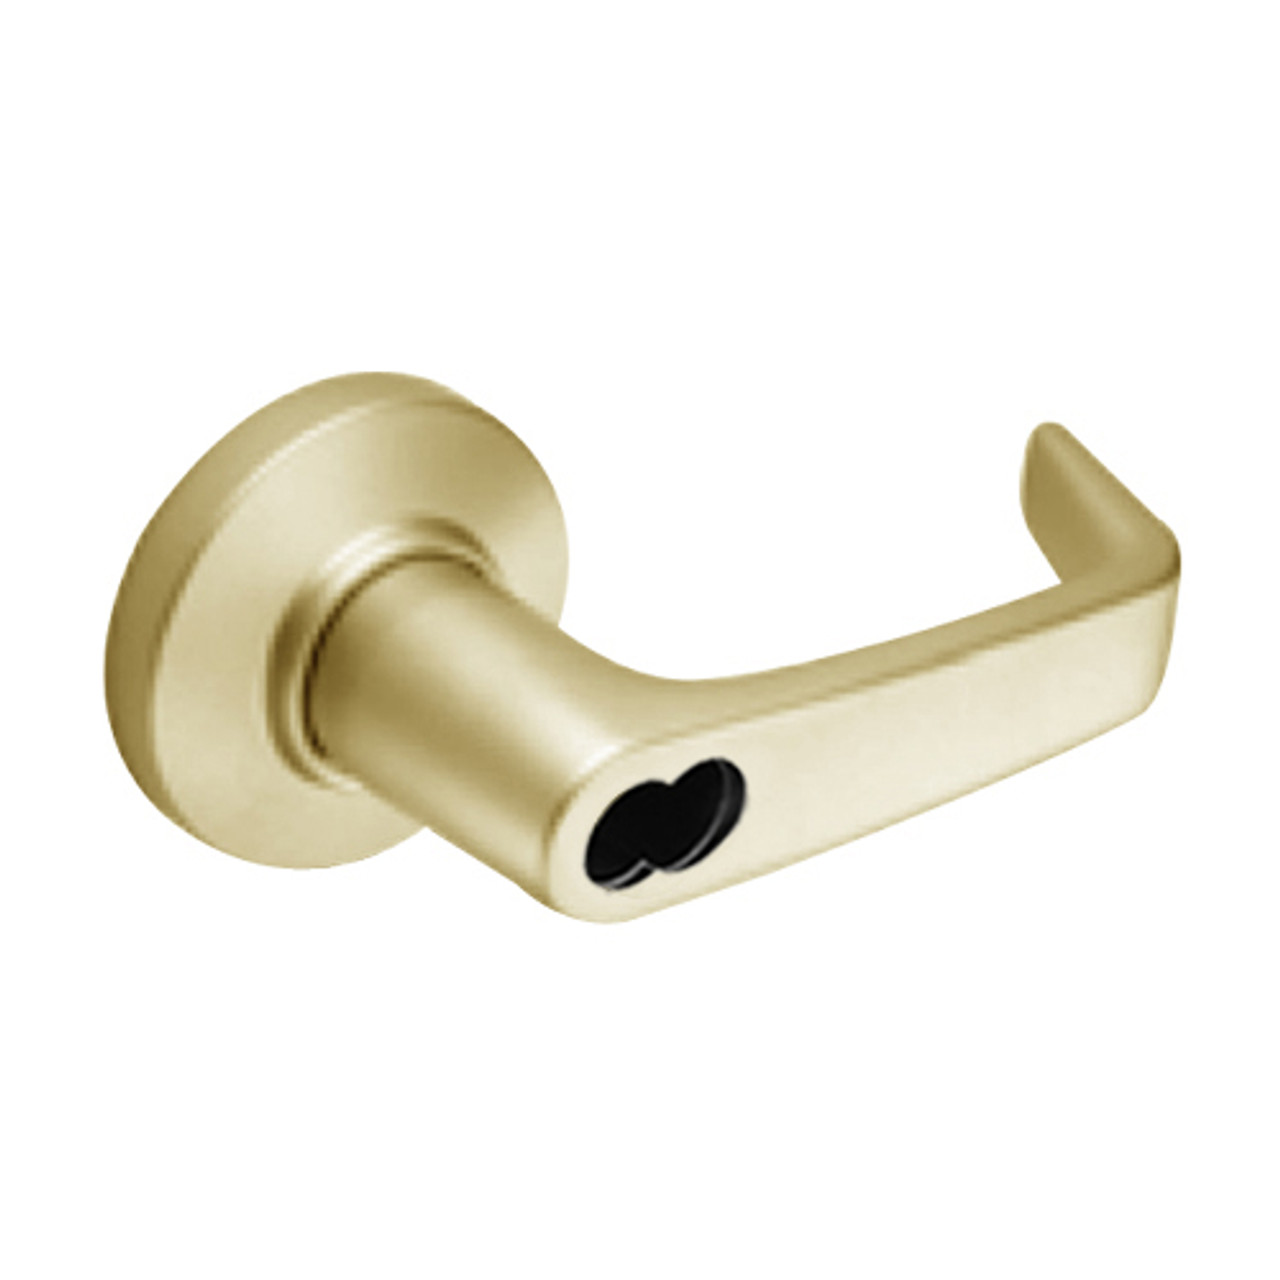 9K57E15CS3606 Best 9K Series Service Station Cylindrical Lever Locks with Contour Angle with Return Lever Design Accept 7 Pin Best Core in Satin Brass